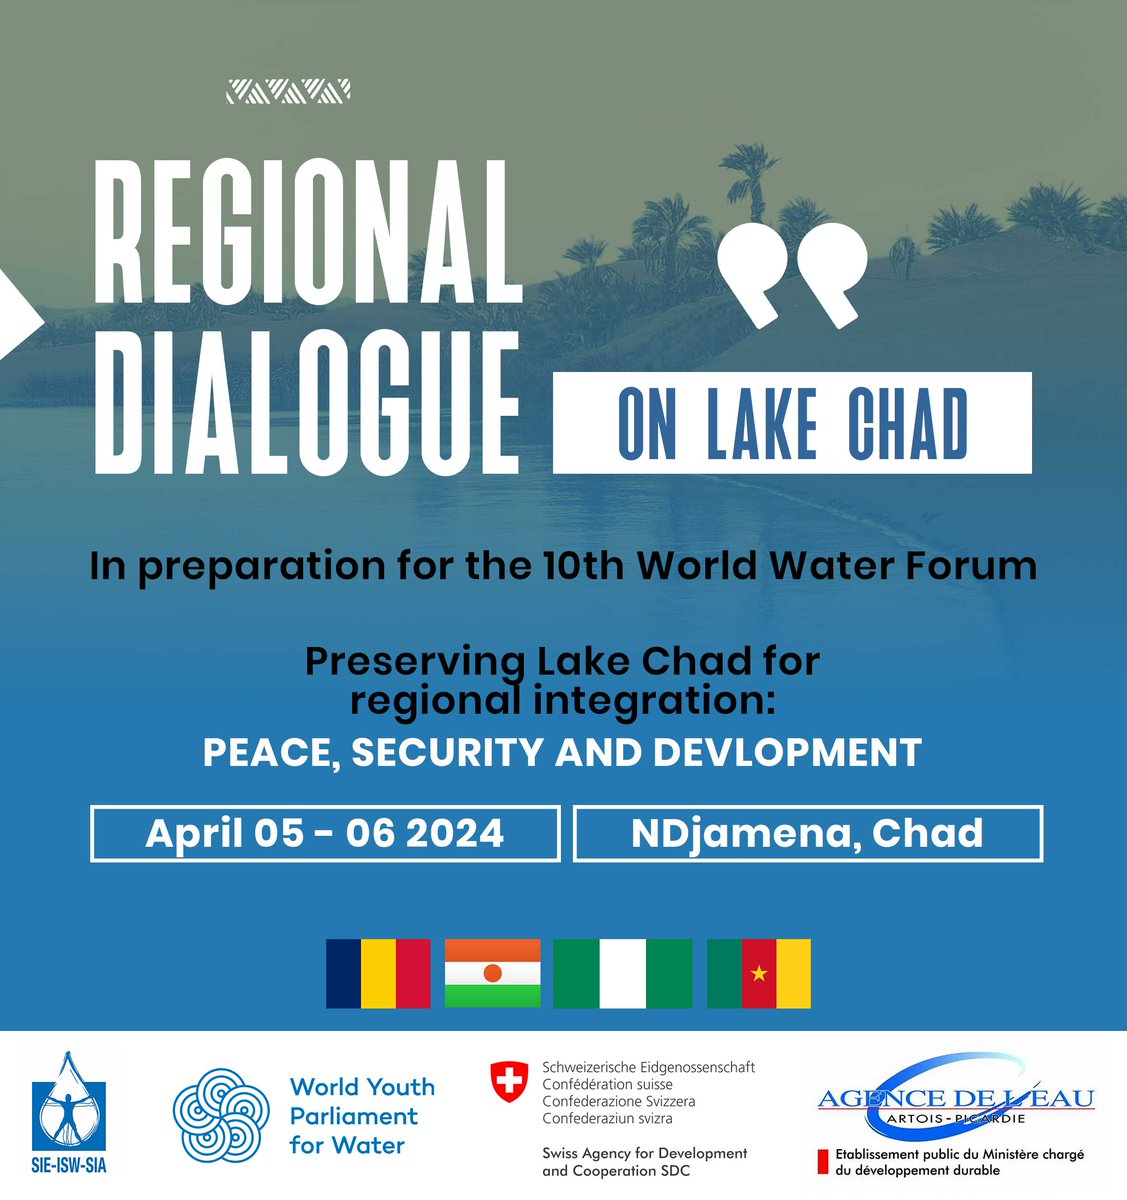 📢 Organized by the Chadian Youth Parliament for Water, the Regional Youth Dialogue on Lake Chad will take place on April 5th and 6th. The aim of this #dialogue is to mobilize, raise awareness and build the capacity of young people in the basin’s member countries.